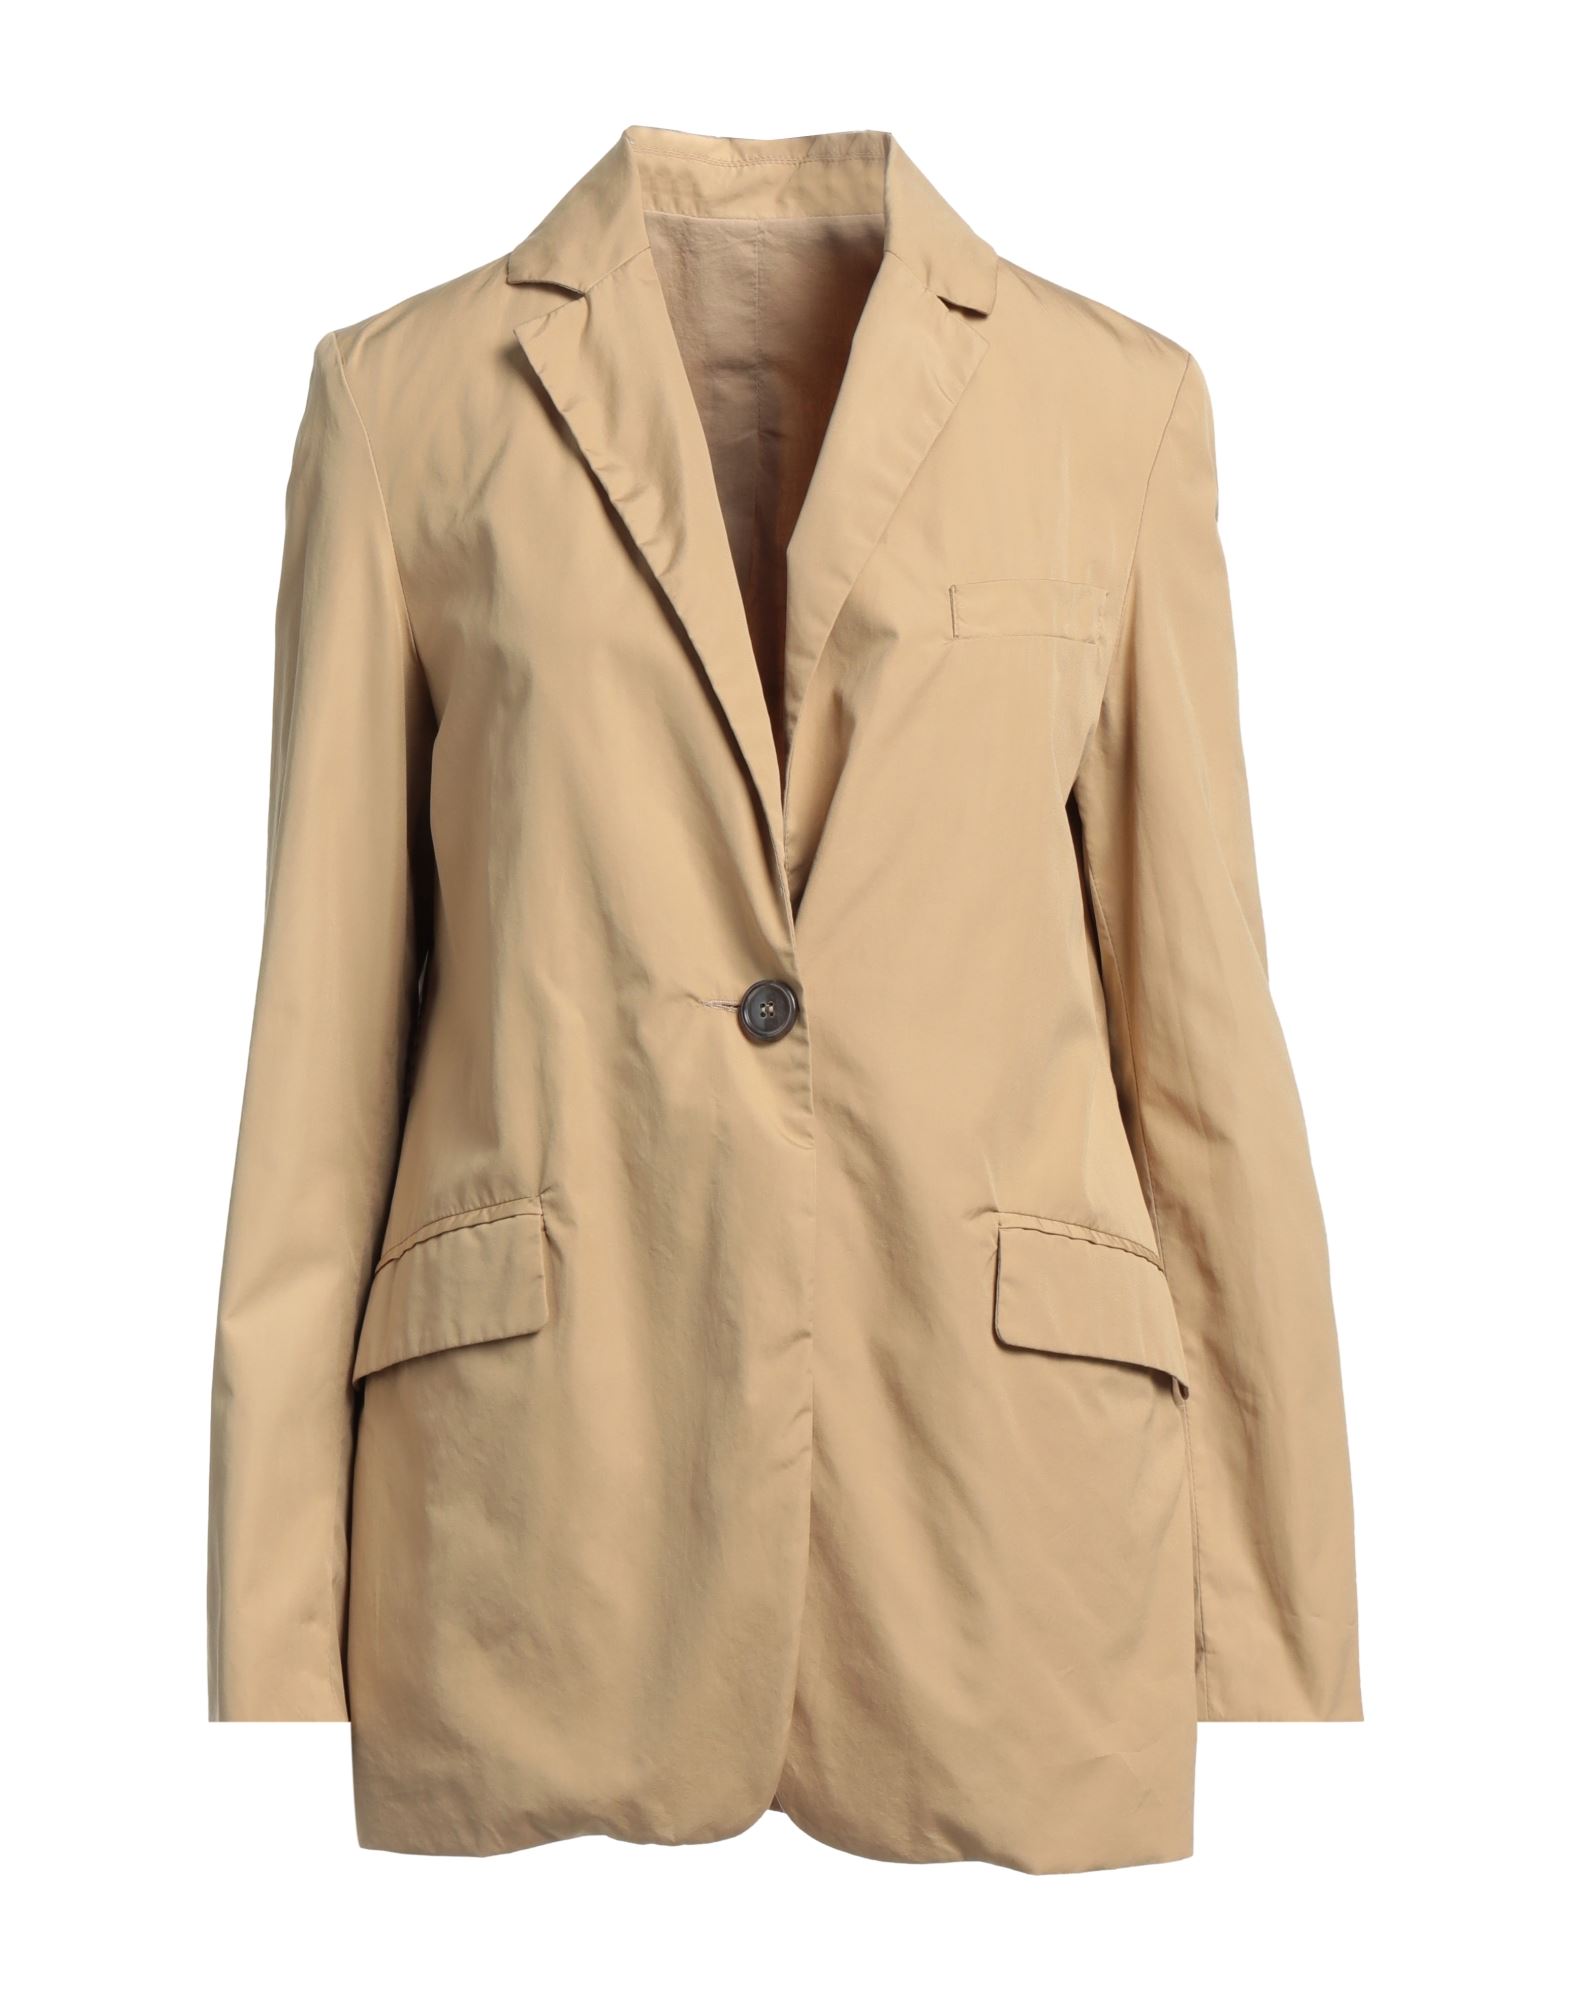 Mauro Grifoni Suit Jackets In Beige